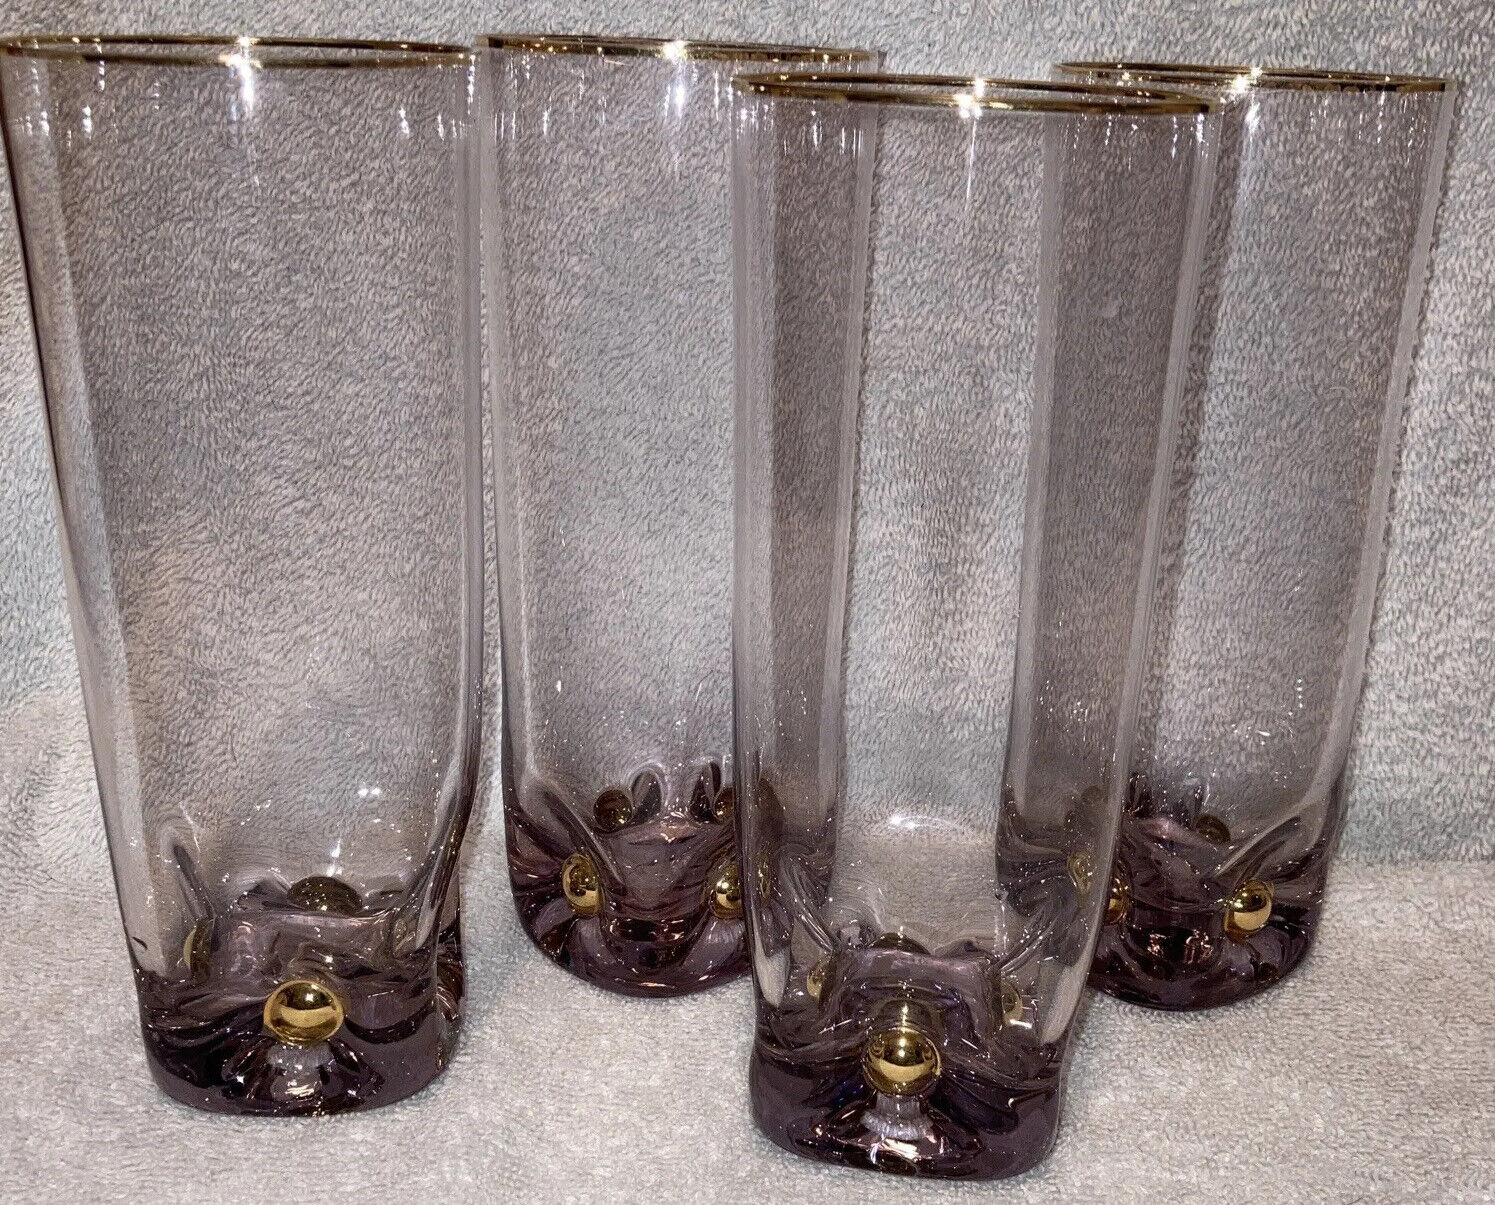 Vintage Iced Tea Beverage Glasses Purple Square Bottom With Gold Ball Accents 4